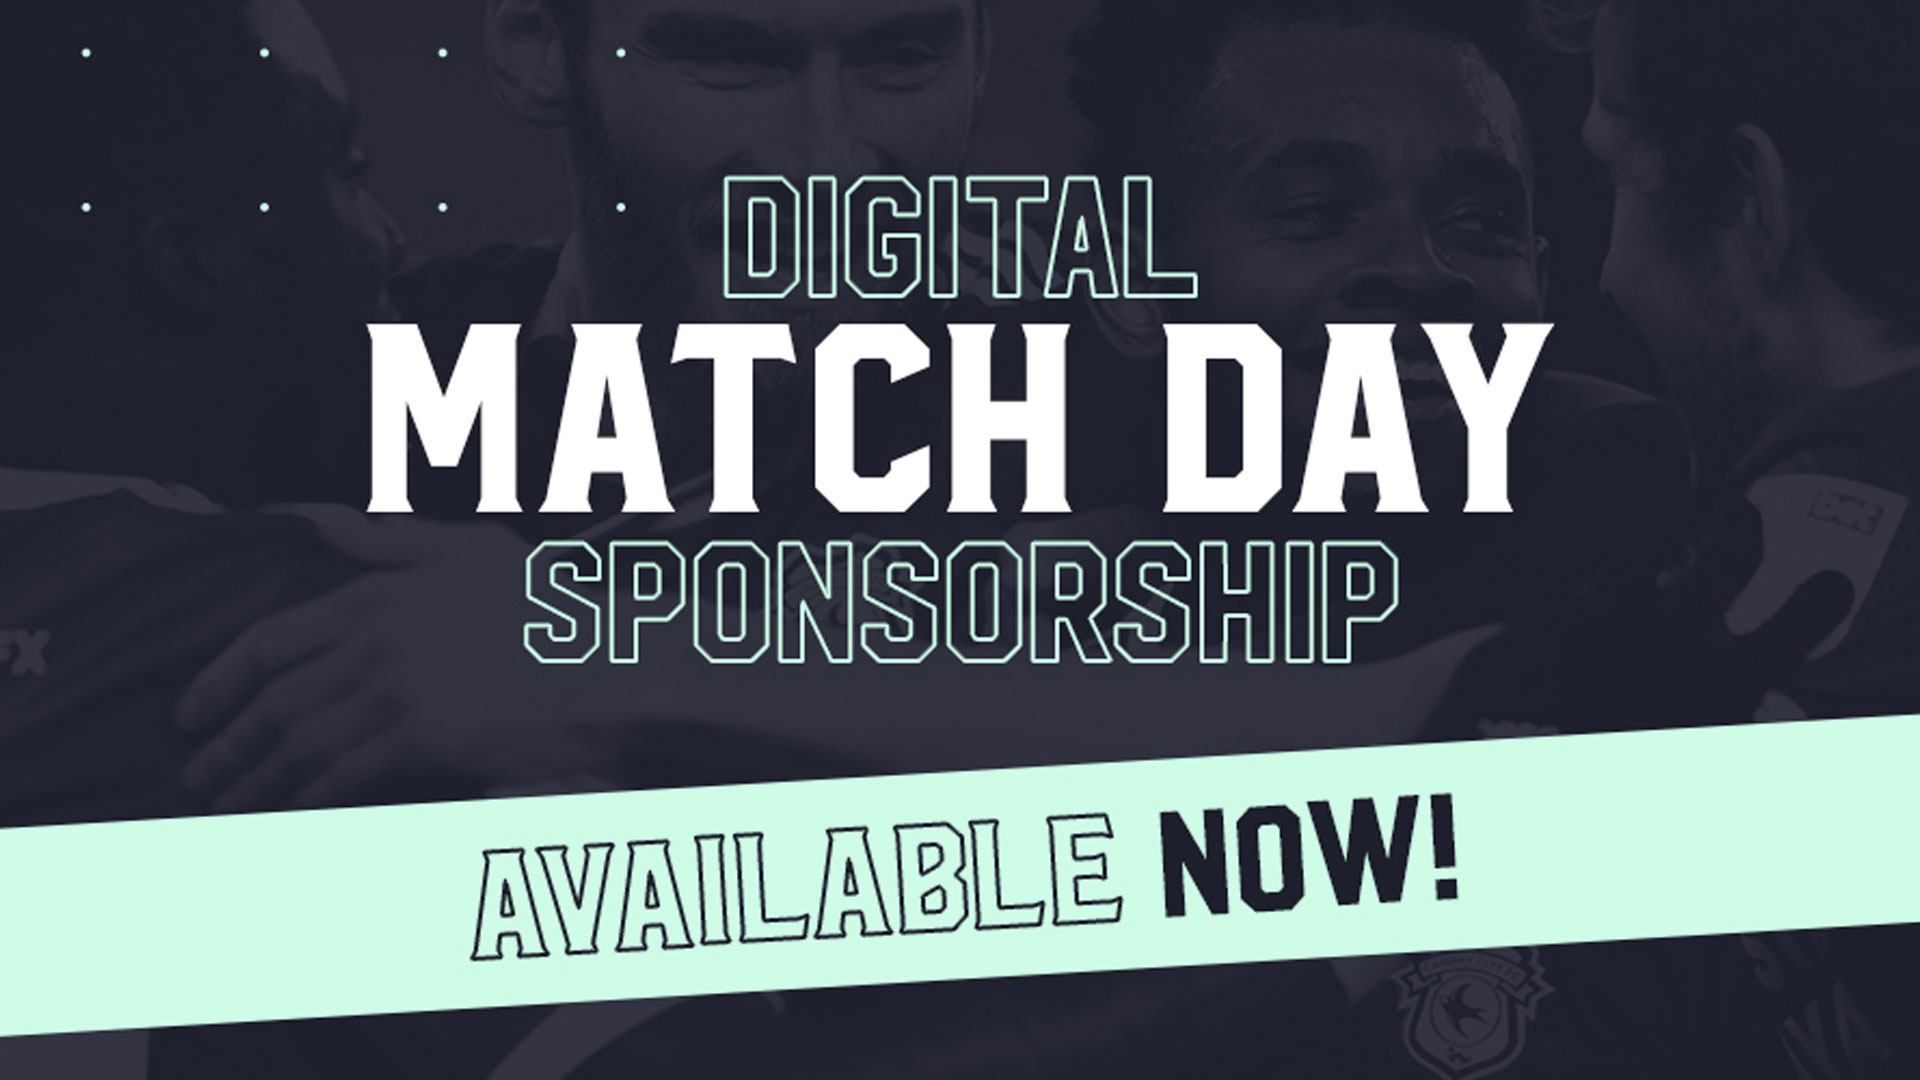 Digital Match Sponsorships are now available...